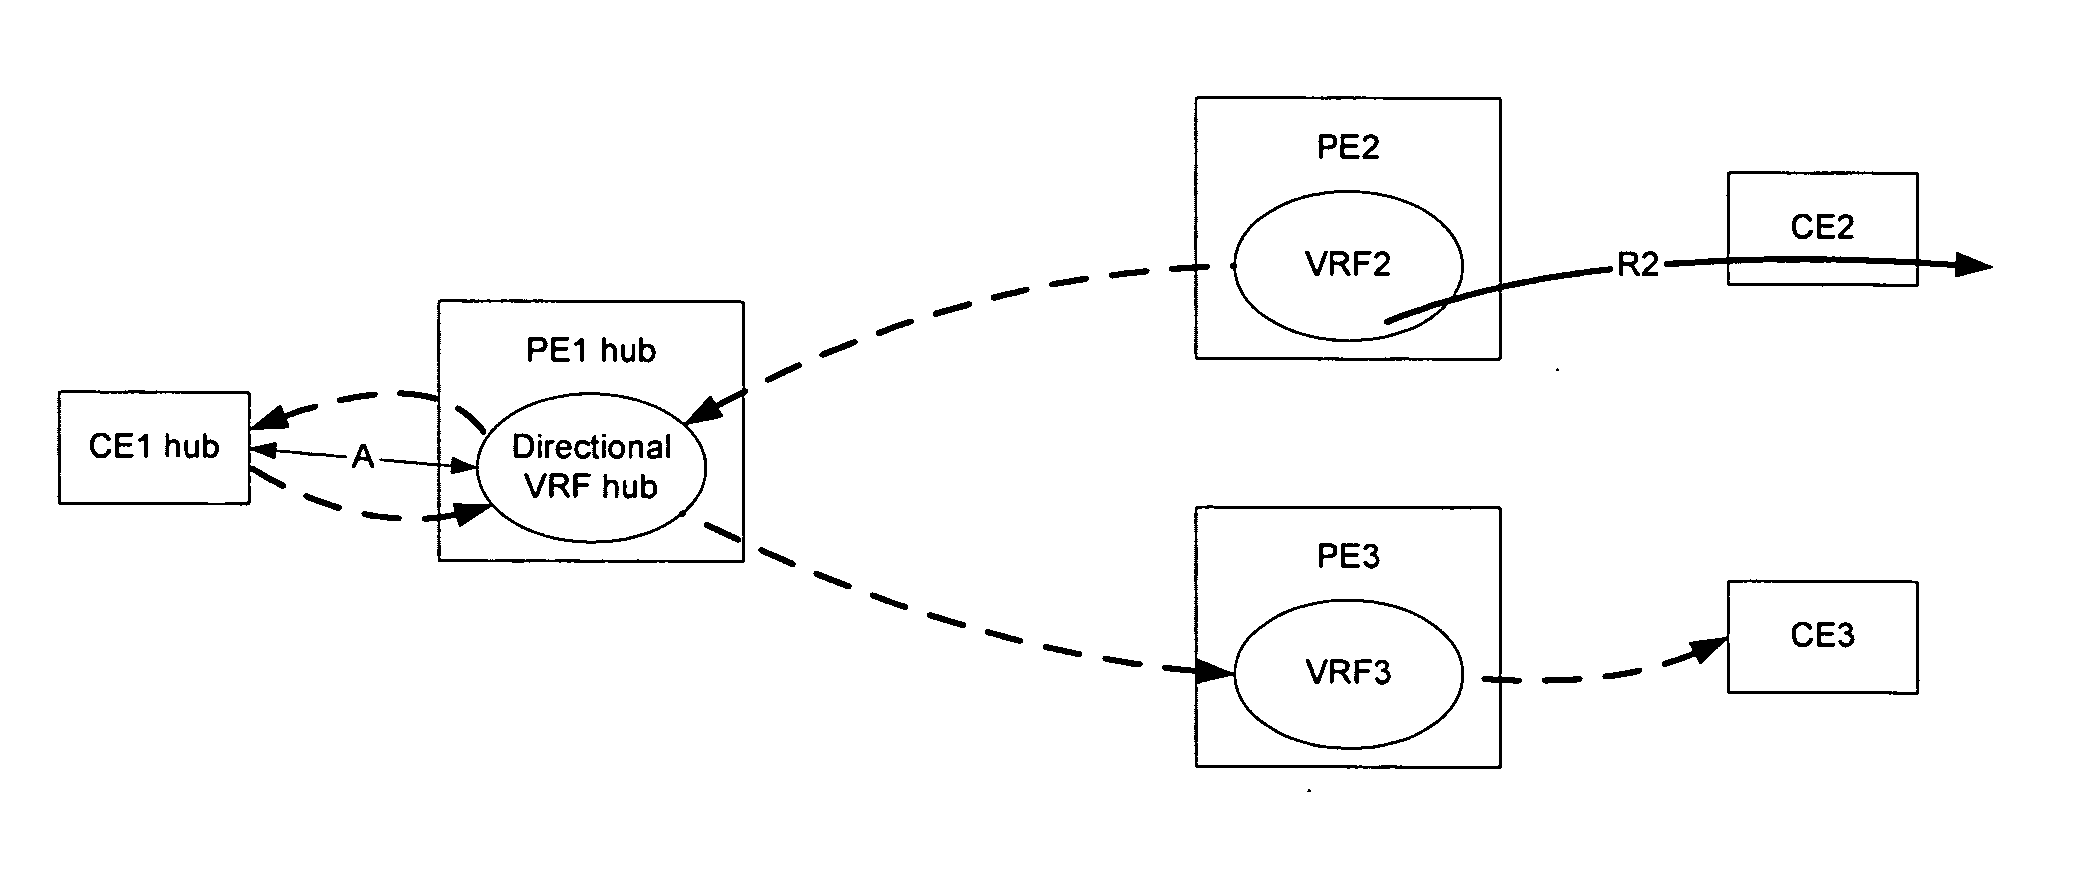 Method and apparatus for implementing hub-and-spoke topology virtual private networks